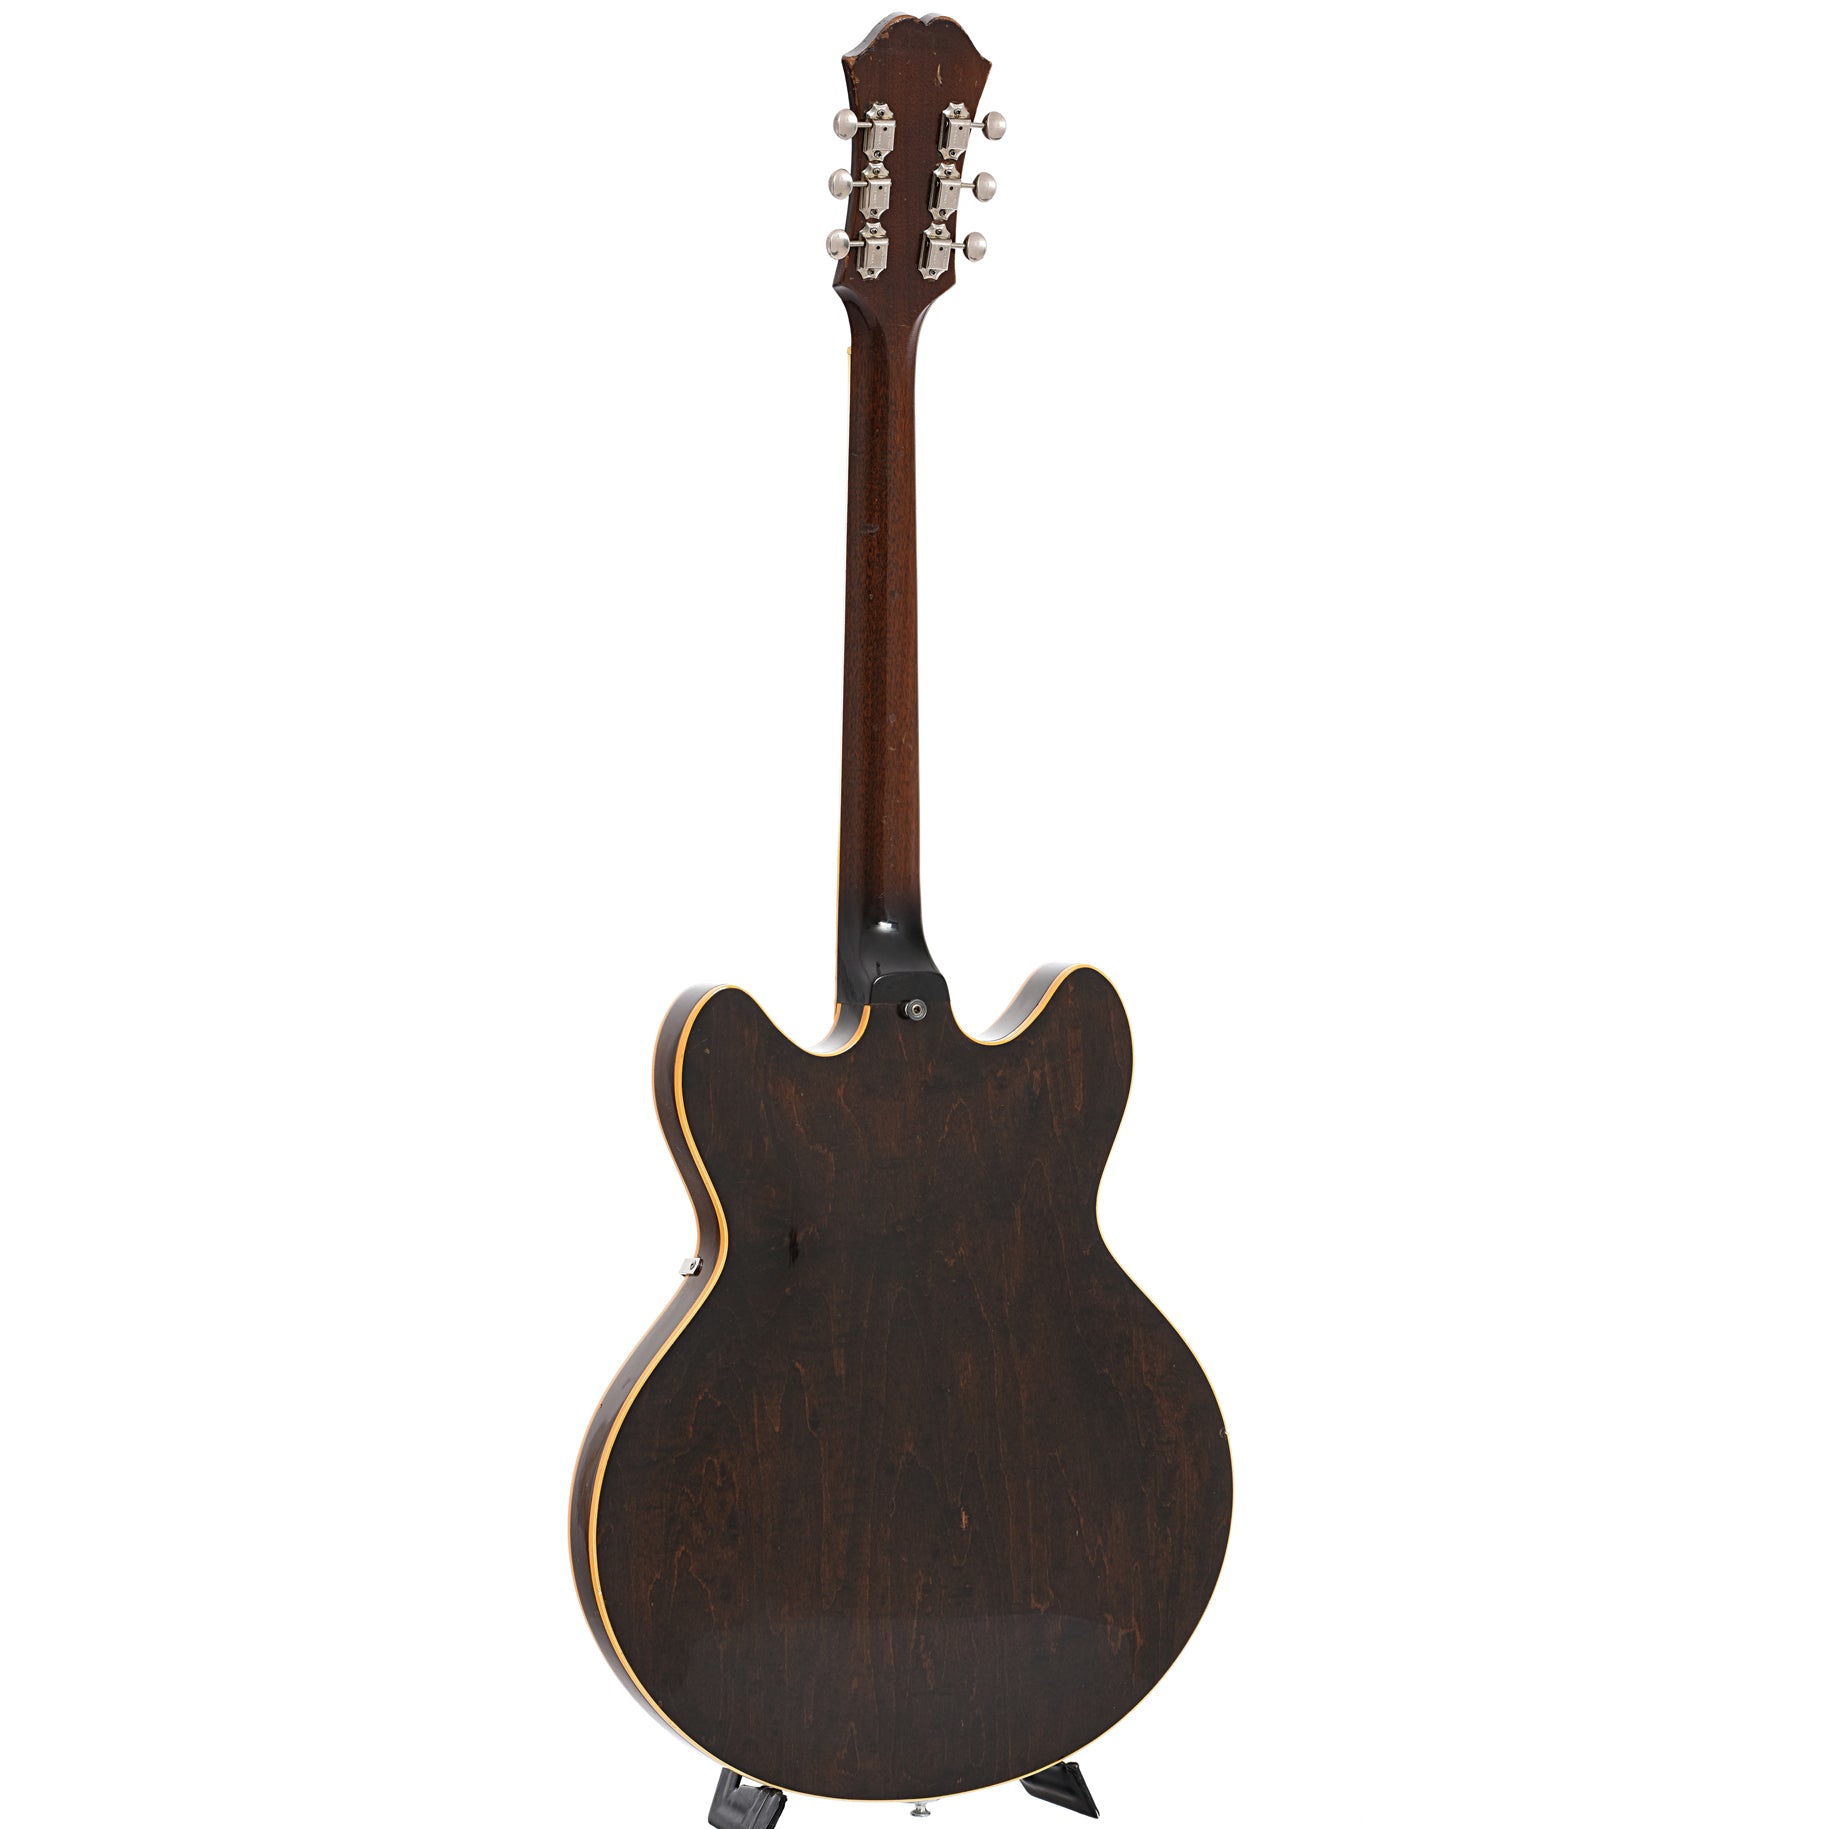 Full back and side of Epiphone E230TD Casino Hollow Body Electric Guitar (c.1966-69)